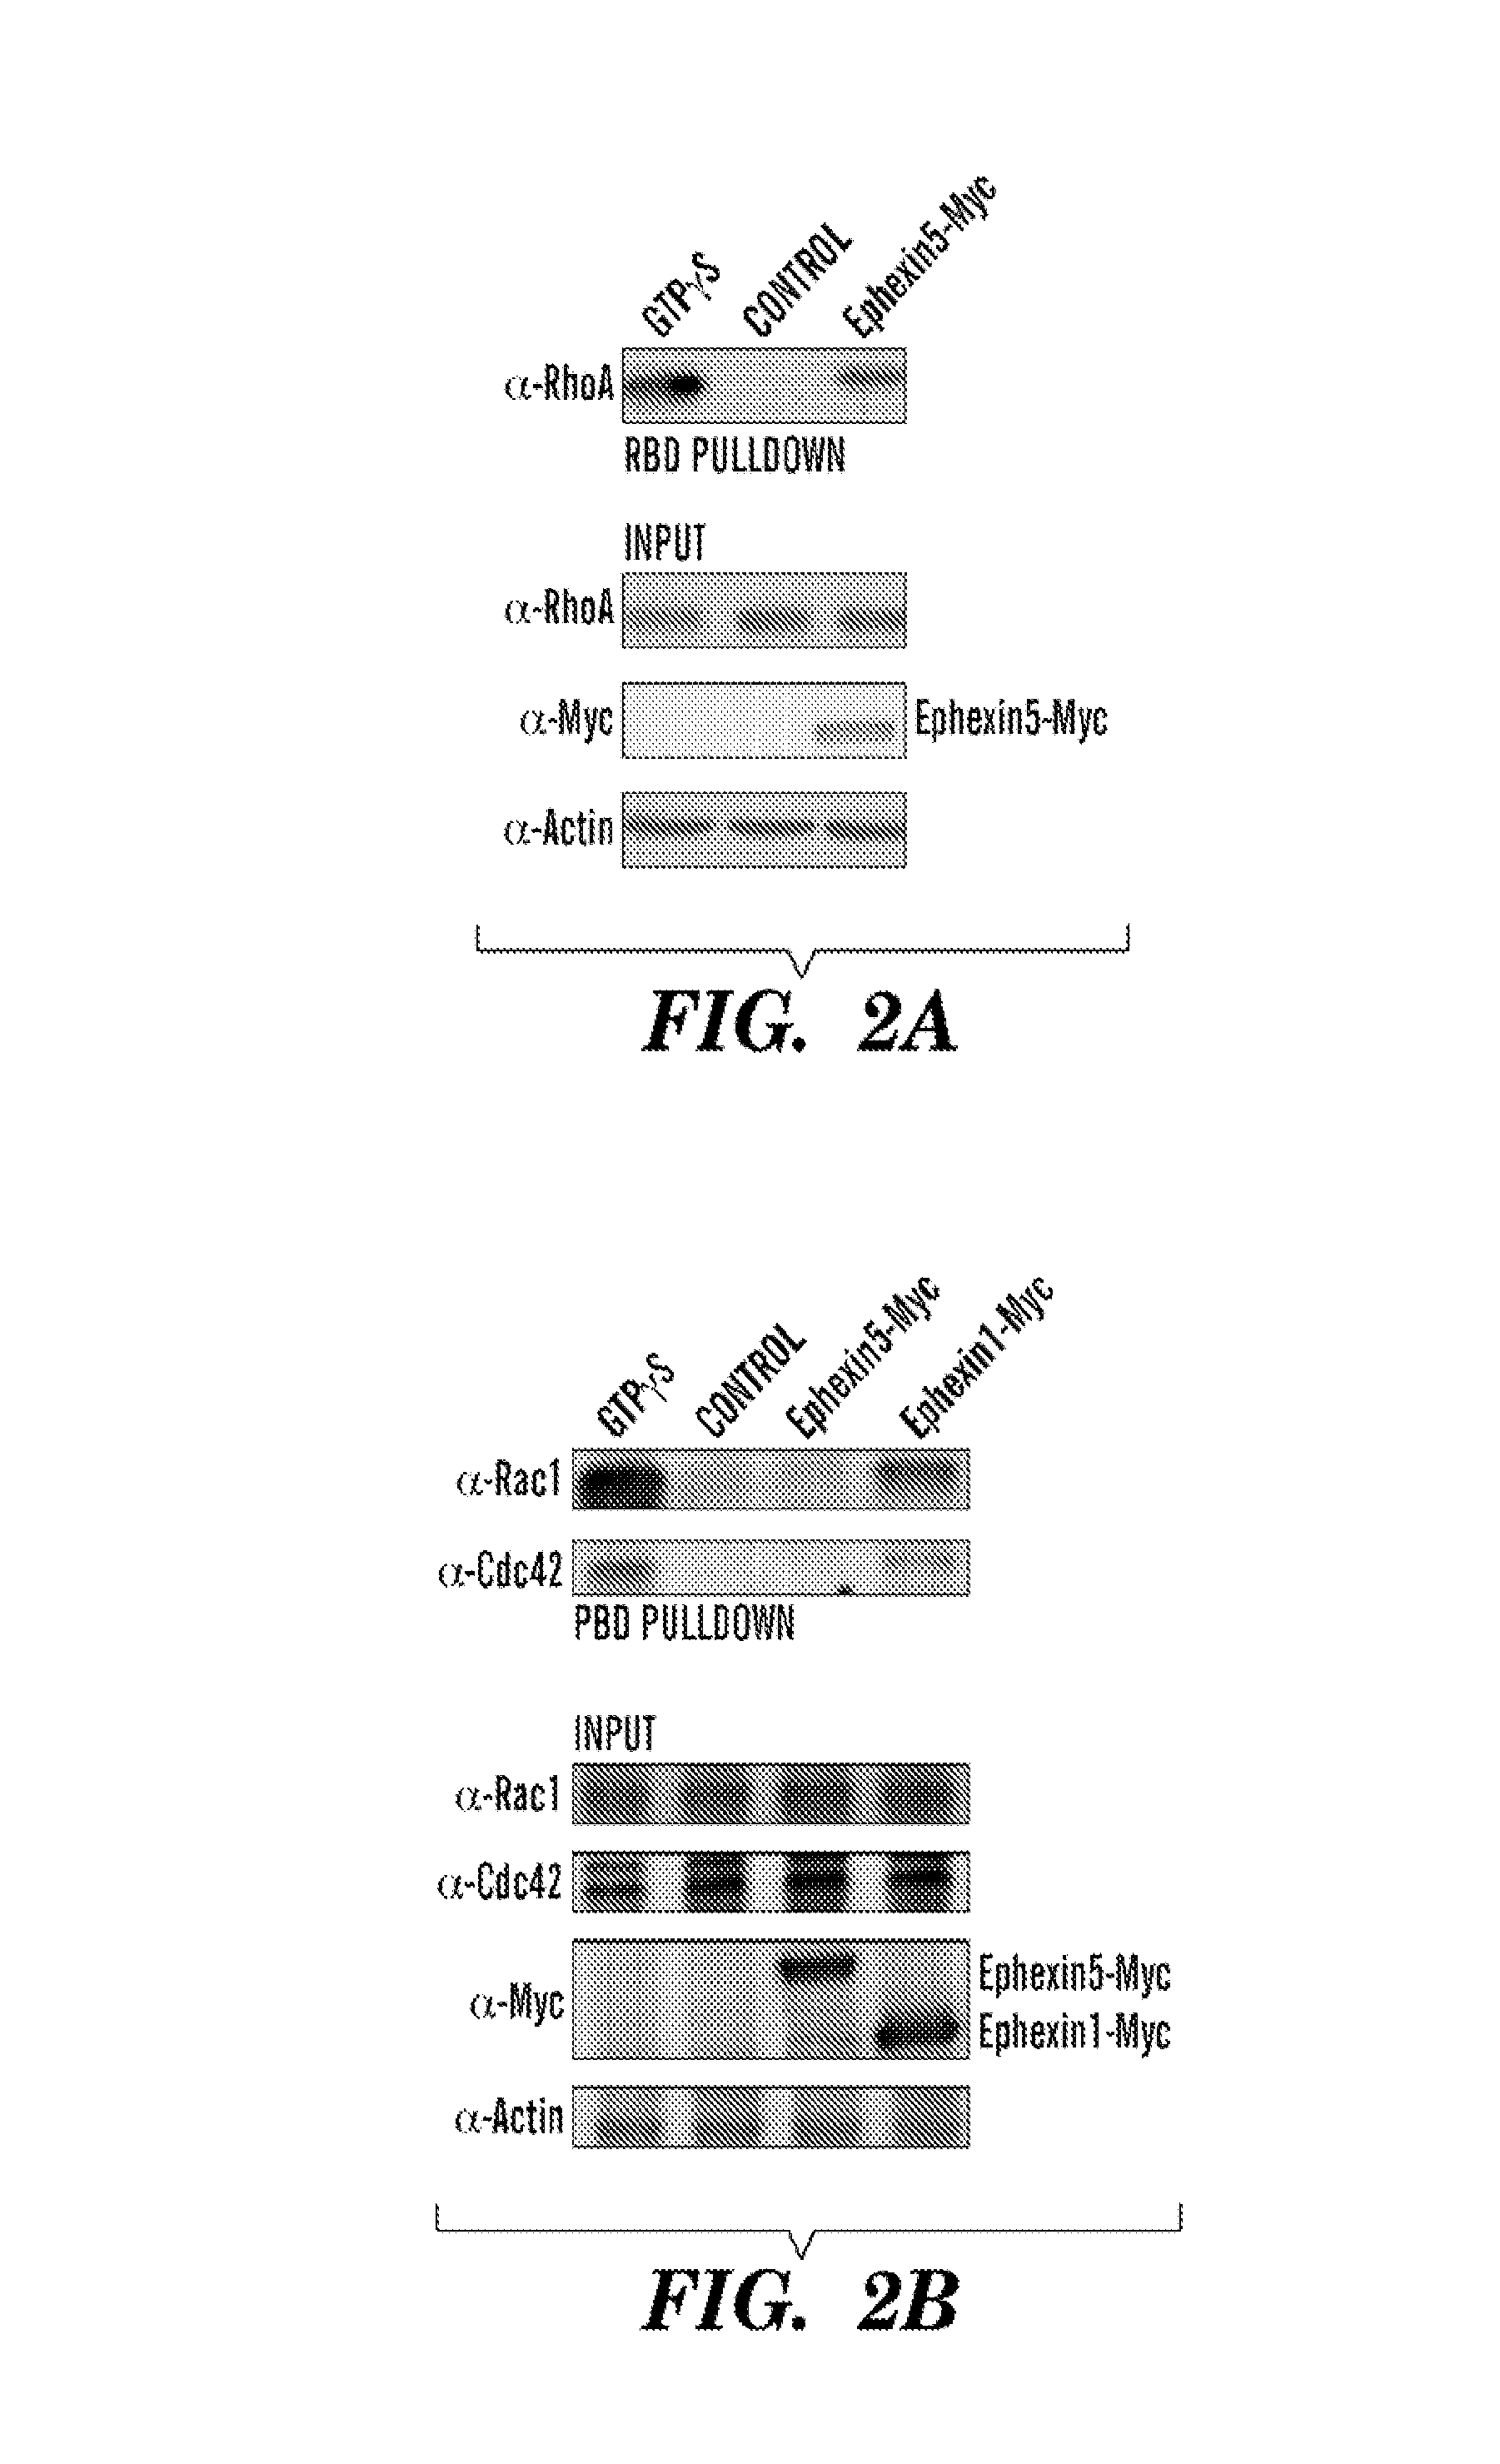 Method for determining activators of excitatory synapse formation